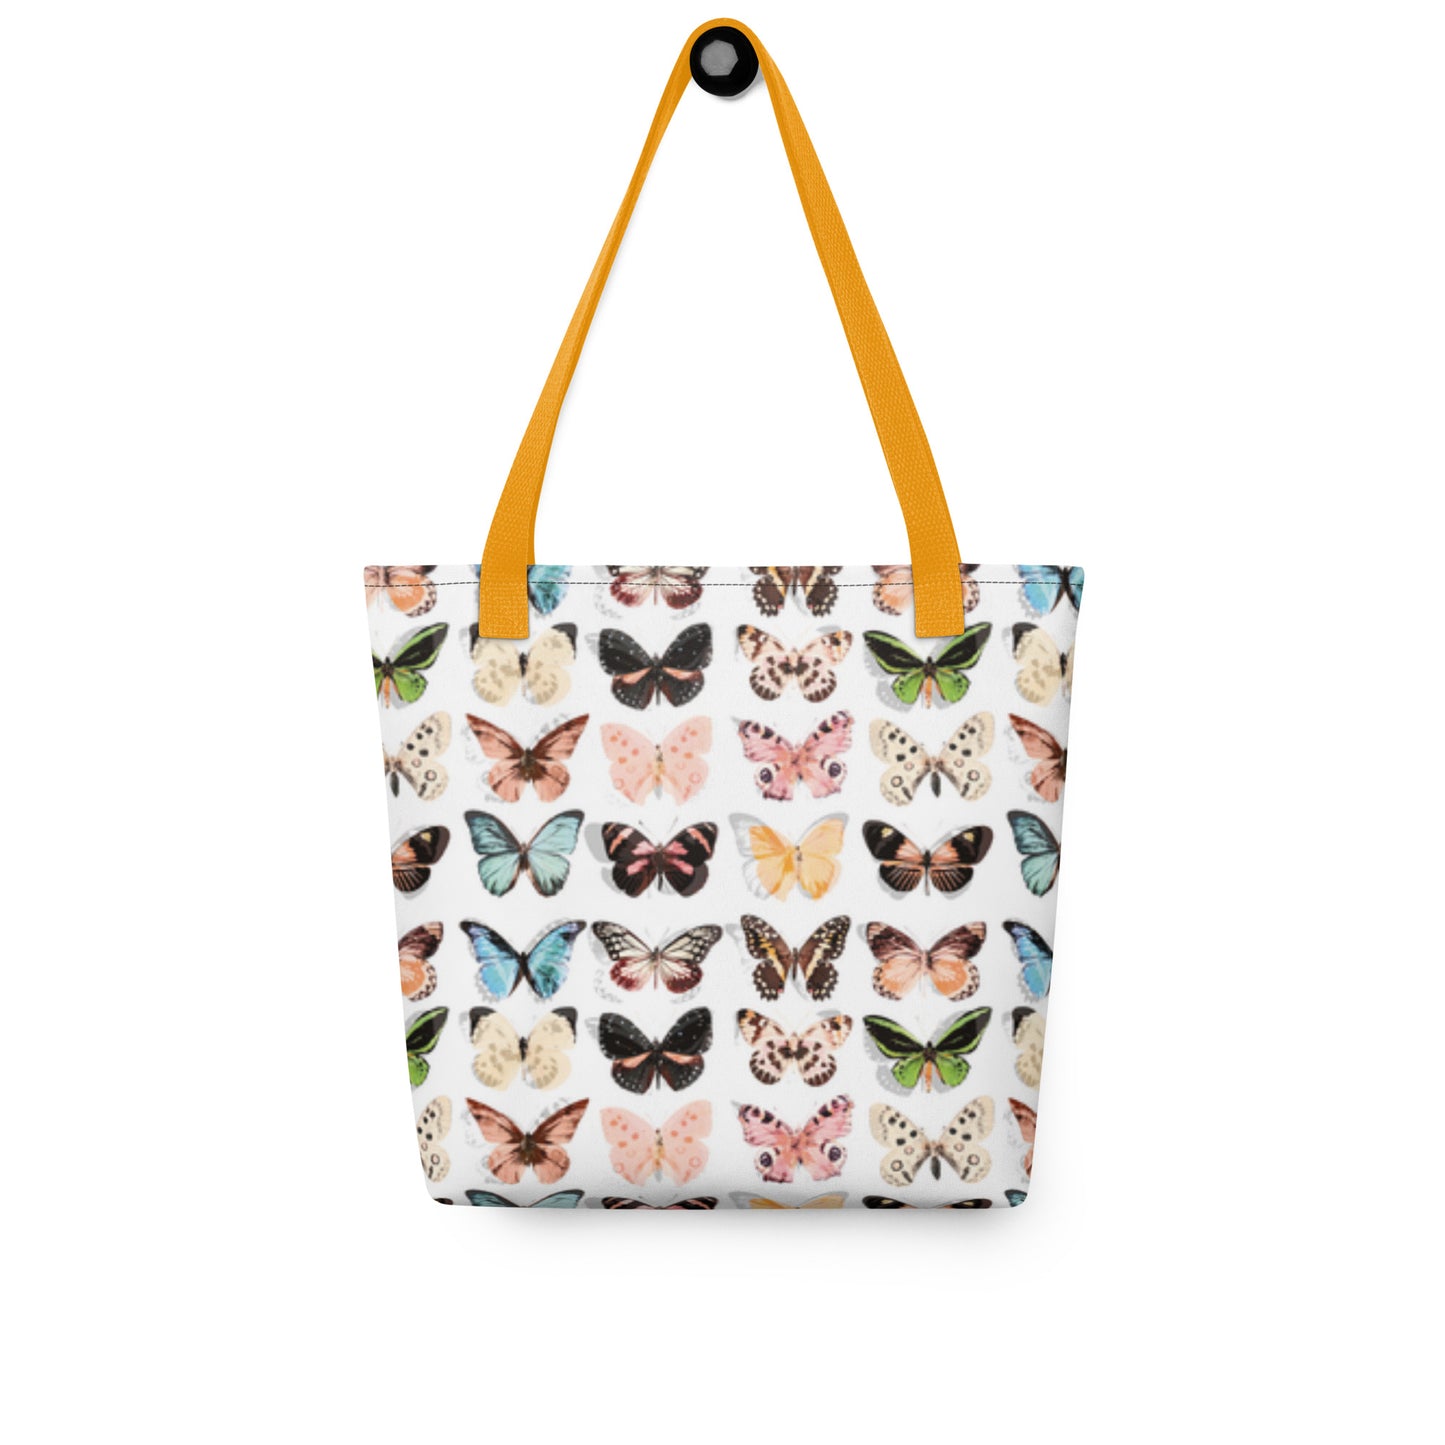 Tote butterfly bag